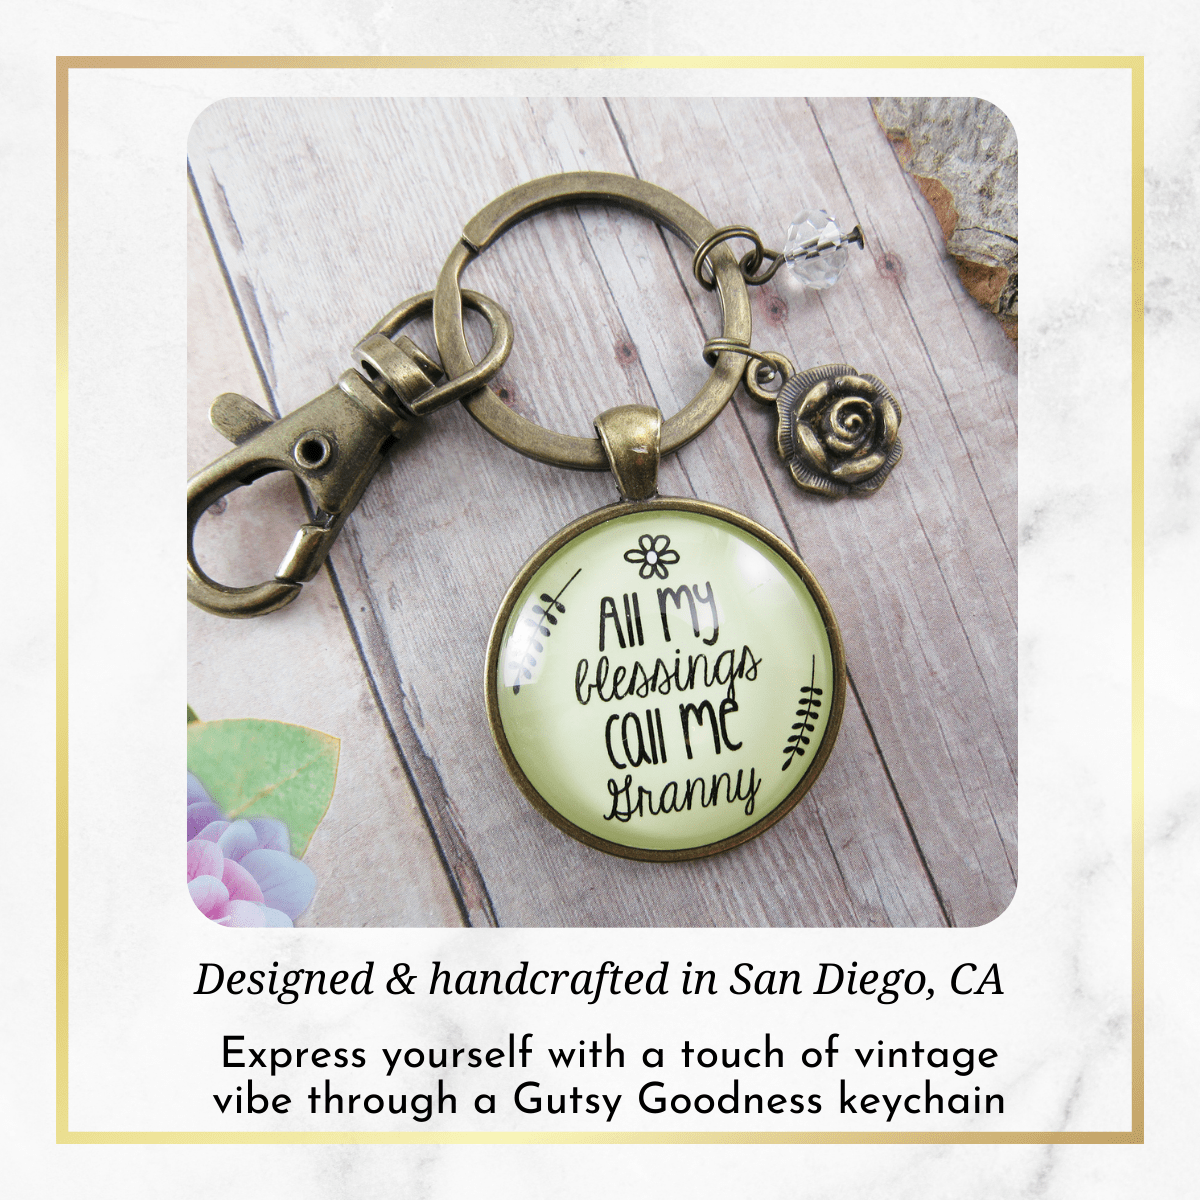 Granny Keychain All My Blessings Grandma Rose Charm Gift Jewelry - Gutsy Goodness Handmade Jewelry;Granny Keychain All My Blessings Grandma Rose Charm Gift Jewelry - Gutsy Goodness Handmade Jewelry Gifts